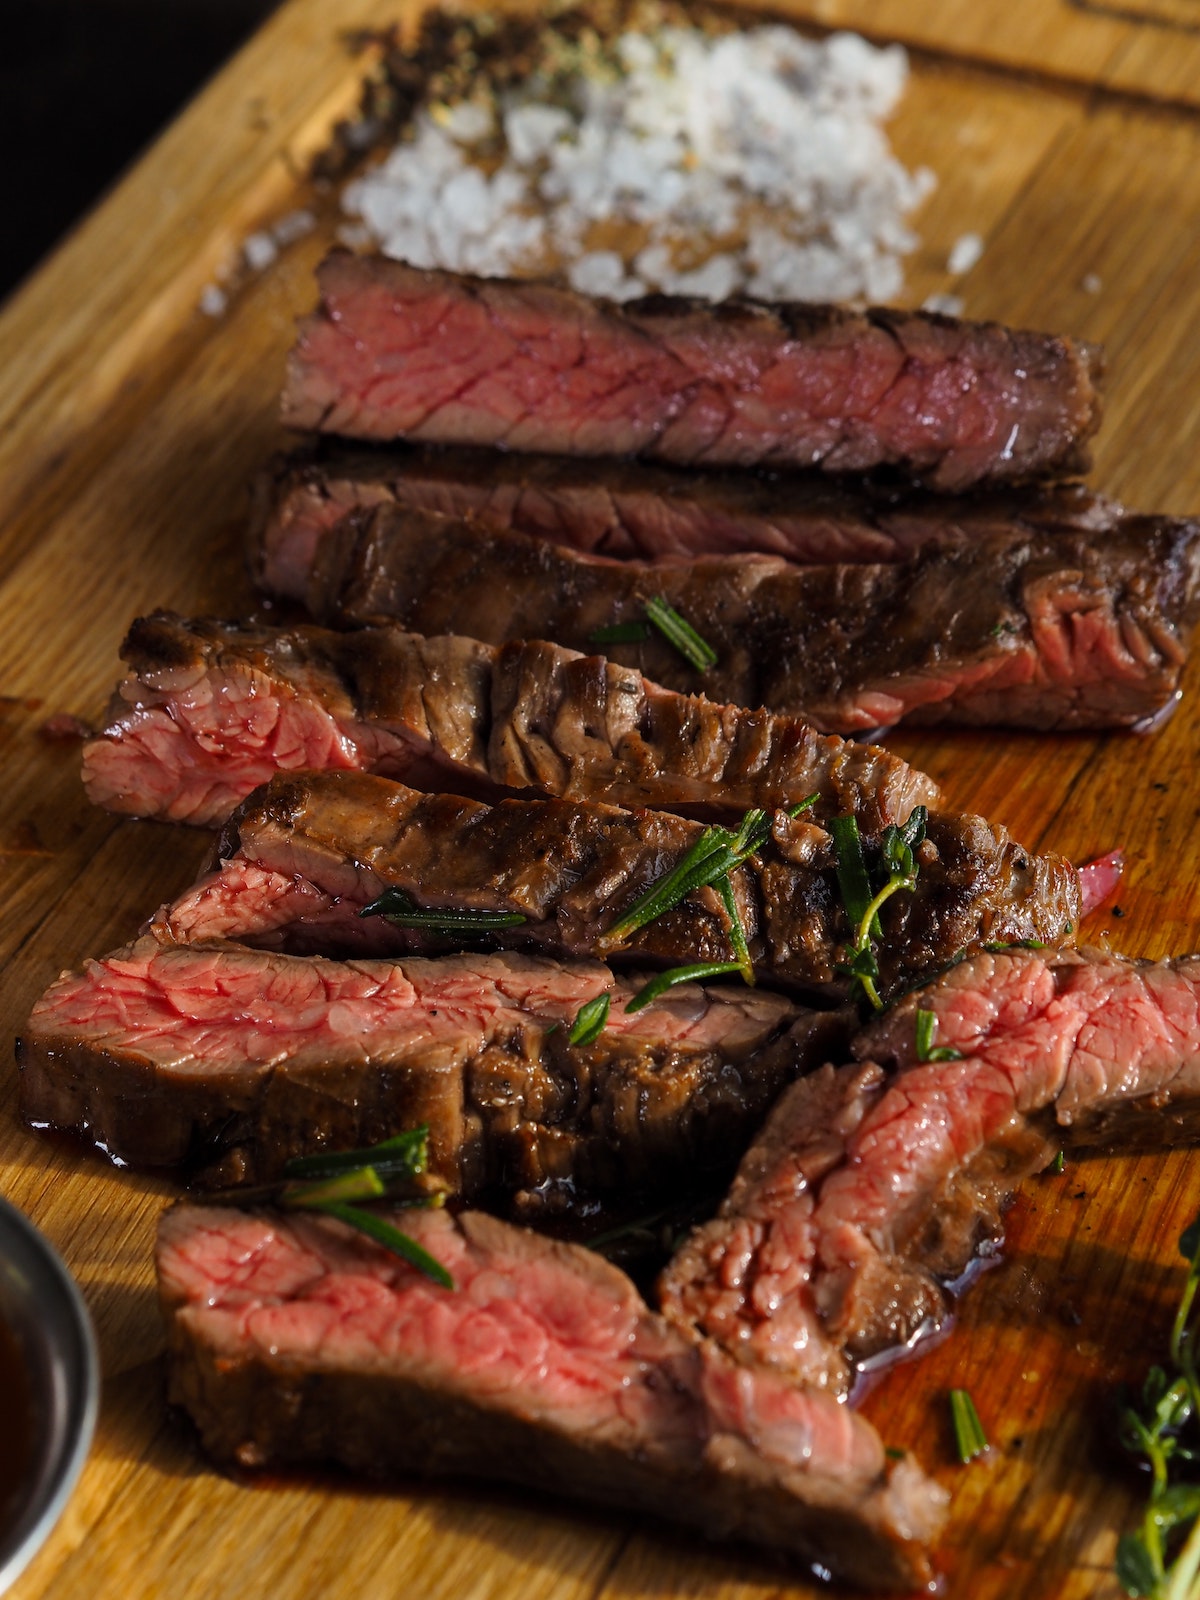 Rare steak garnished with herbs on a wooden board